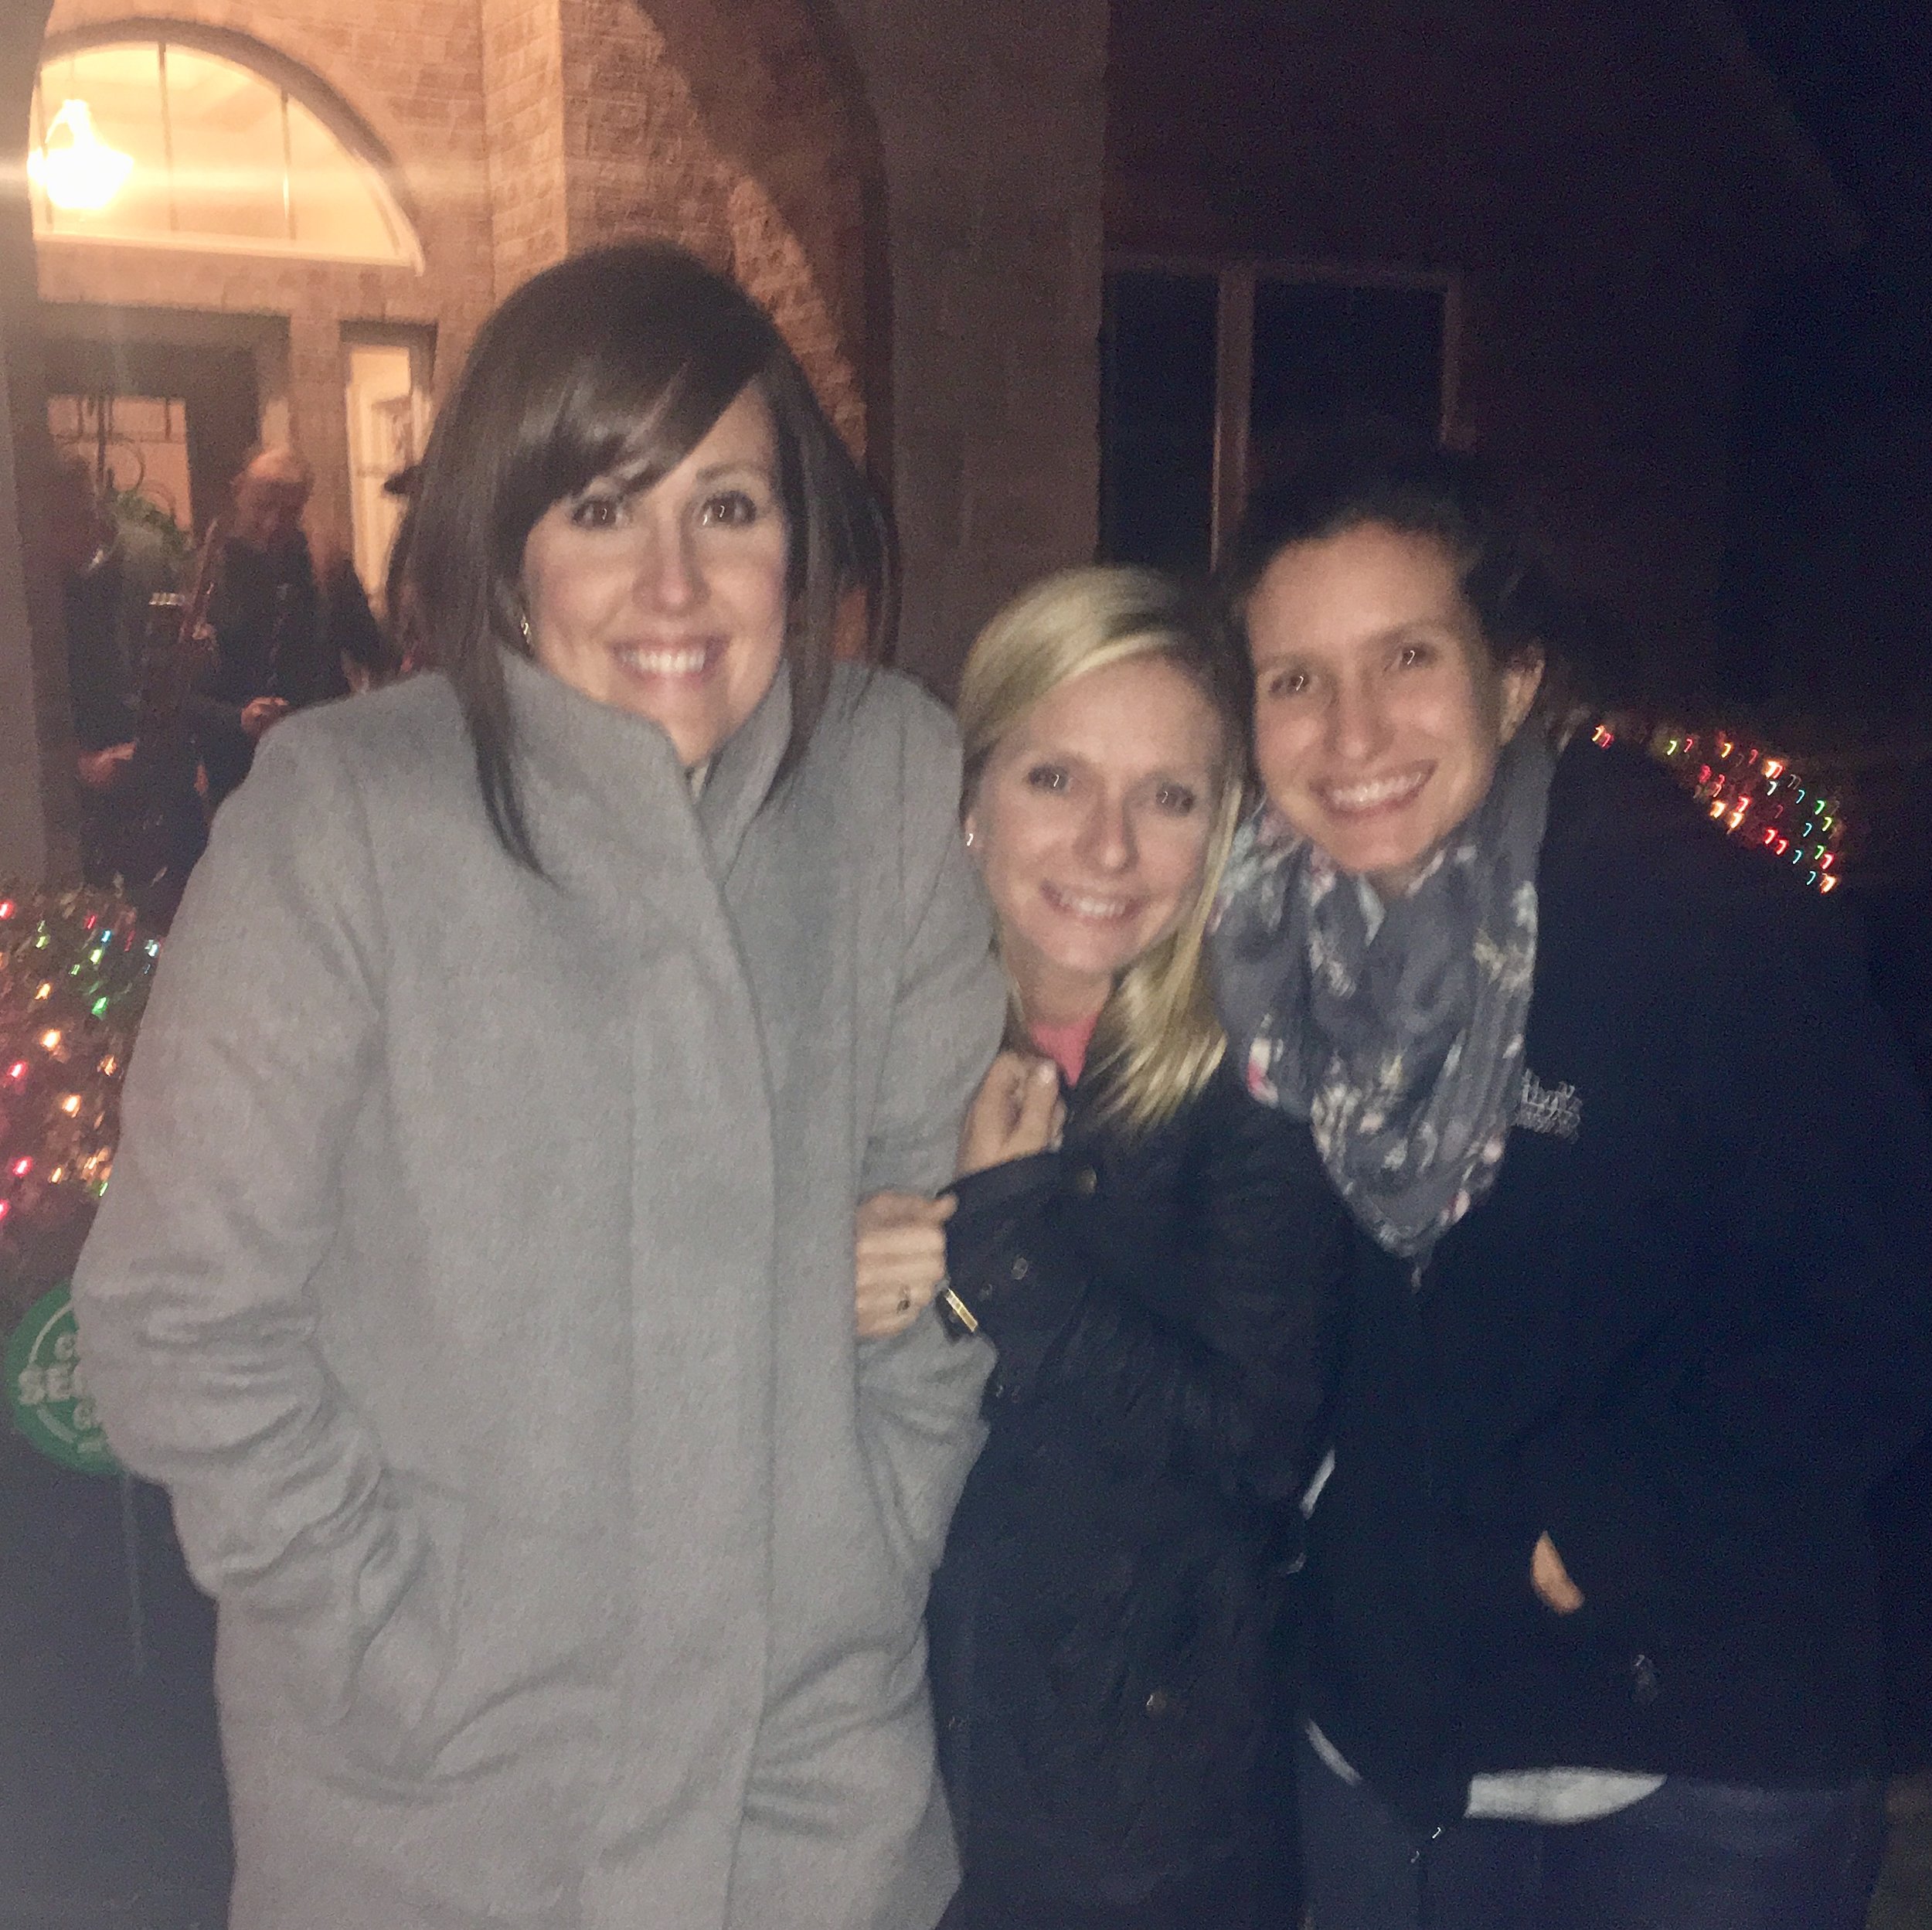 Here's a blurry pic of the roomies and me freezing cold while watching neighborhood fireworks on our perfectly-non-defiantly-different New Years' Eve!